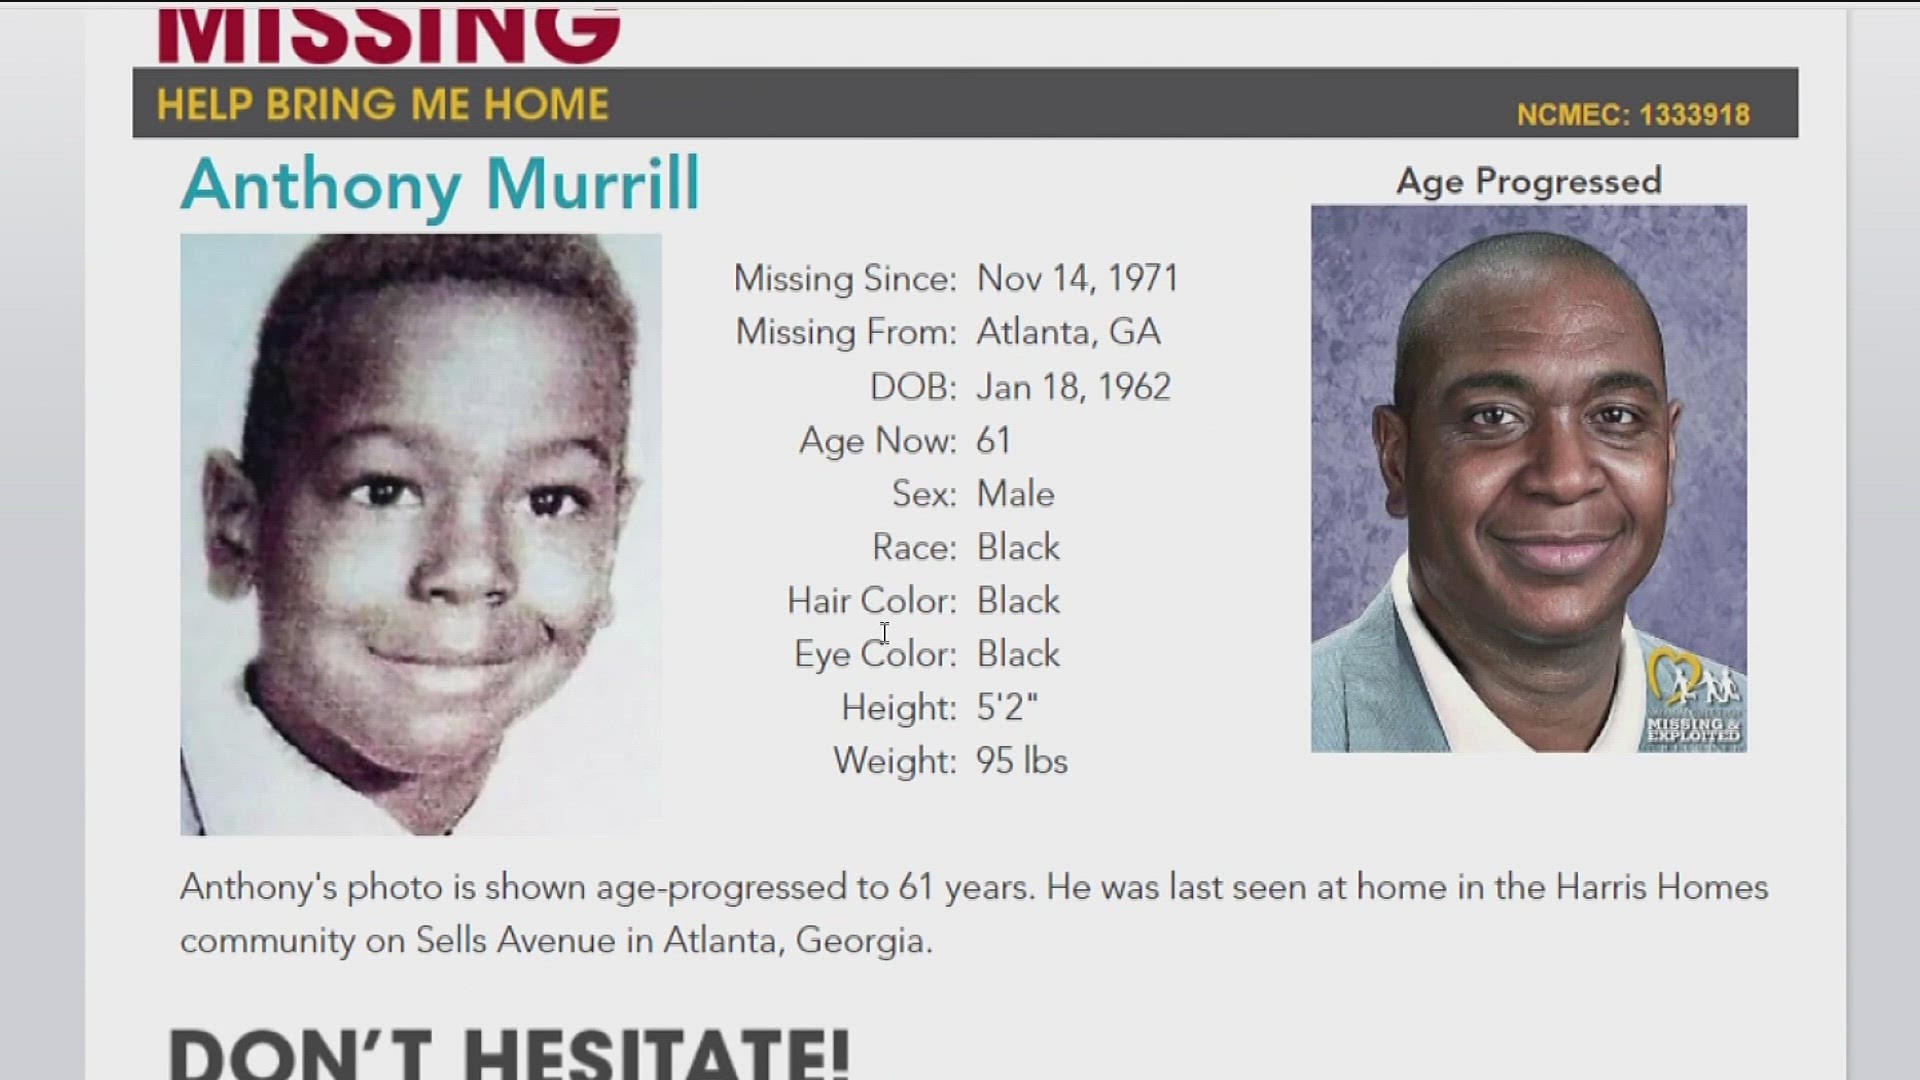 Anthony Murrill disappeared decades ago when he never returned home after playing outside.